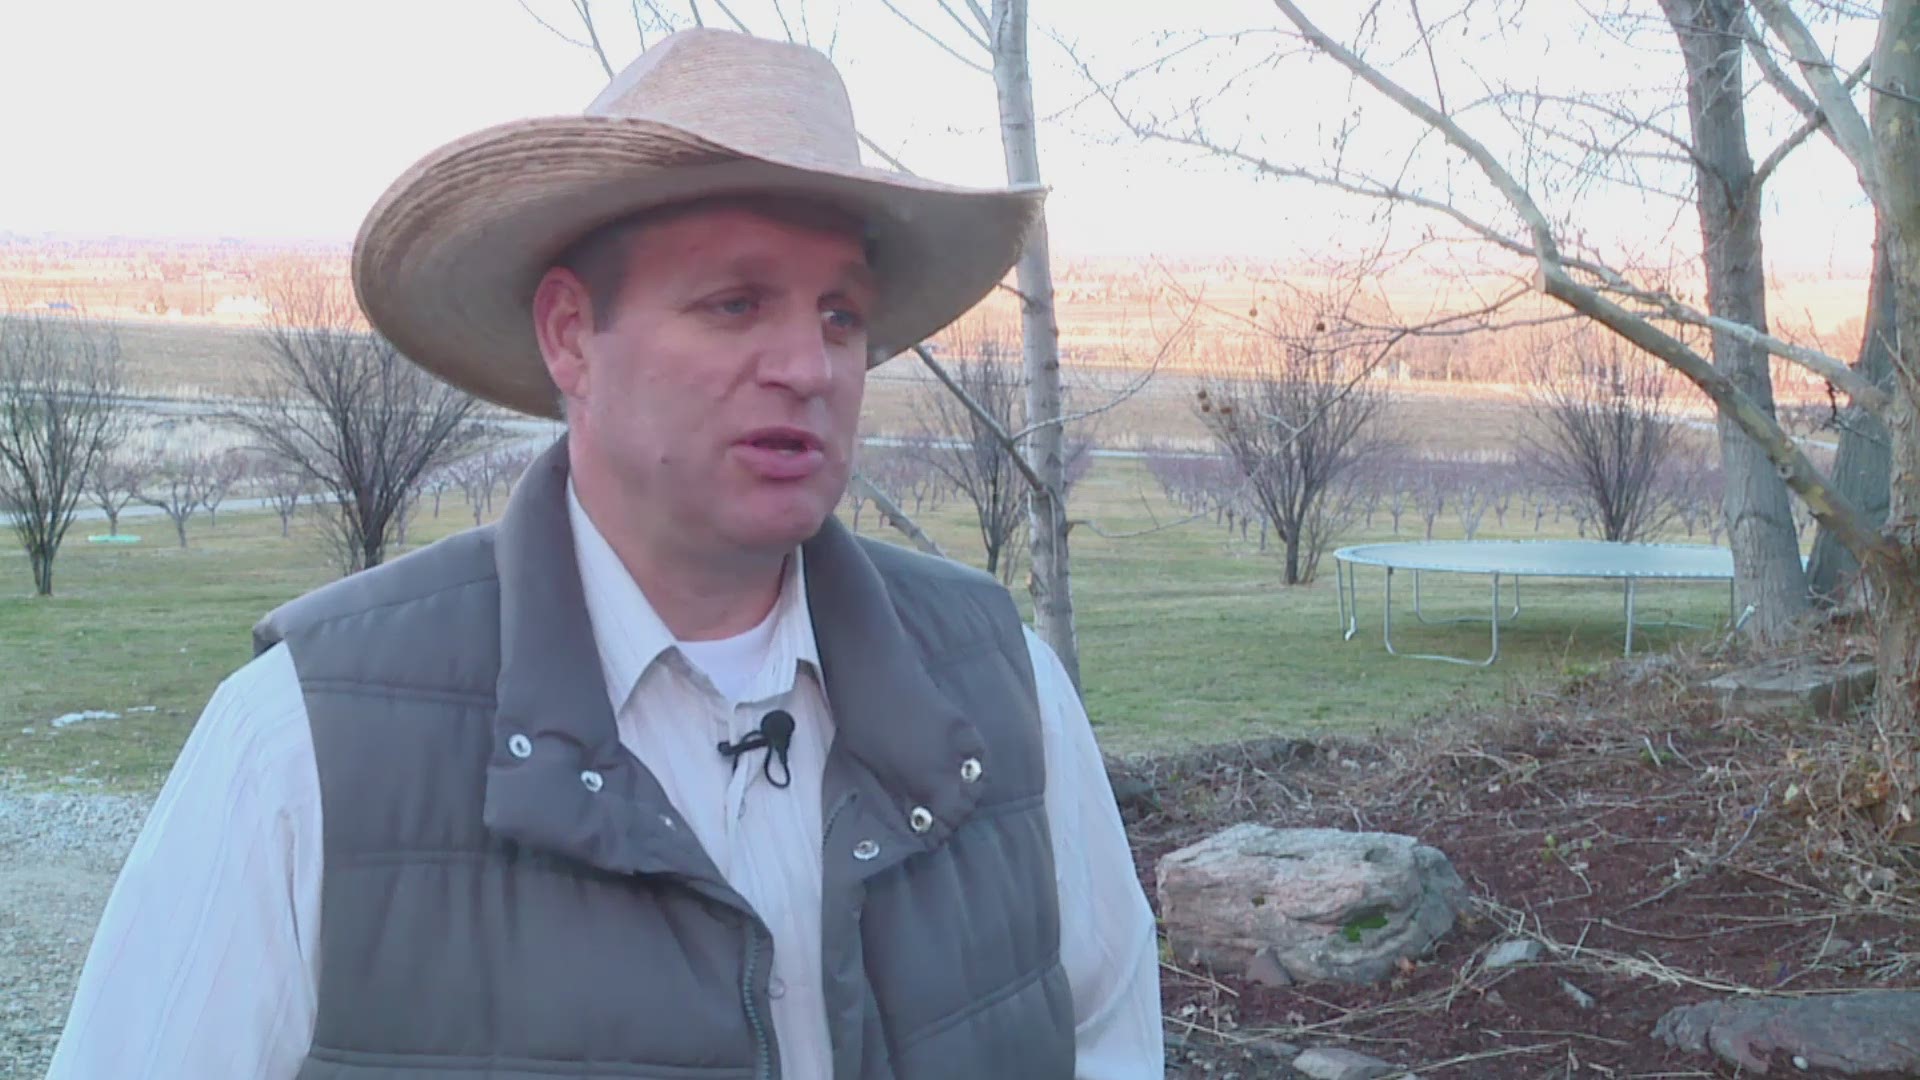 Ammon Bundy speaks out: 'They basically came to kill our family' | ktvb.com